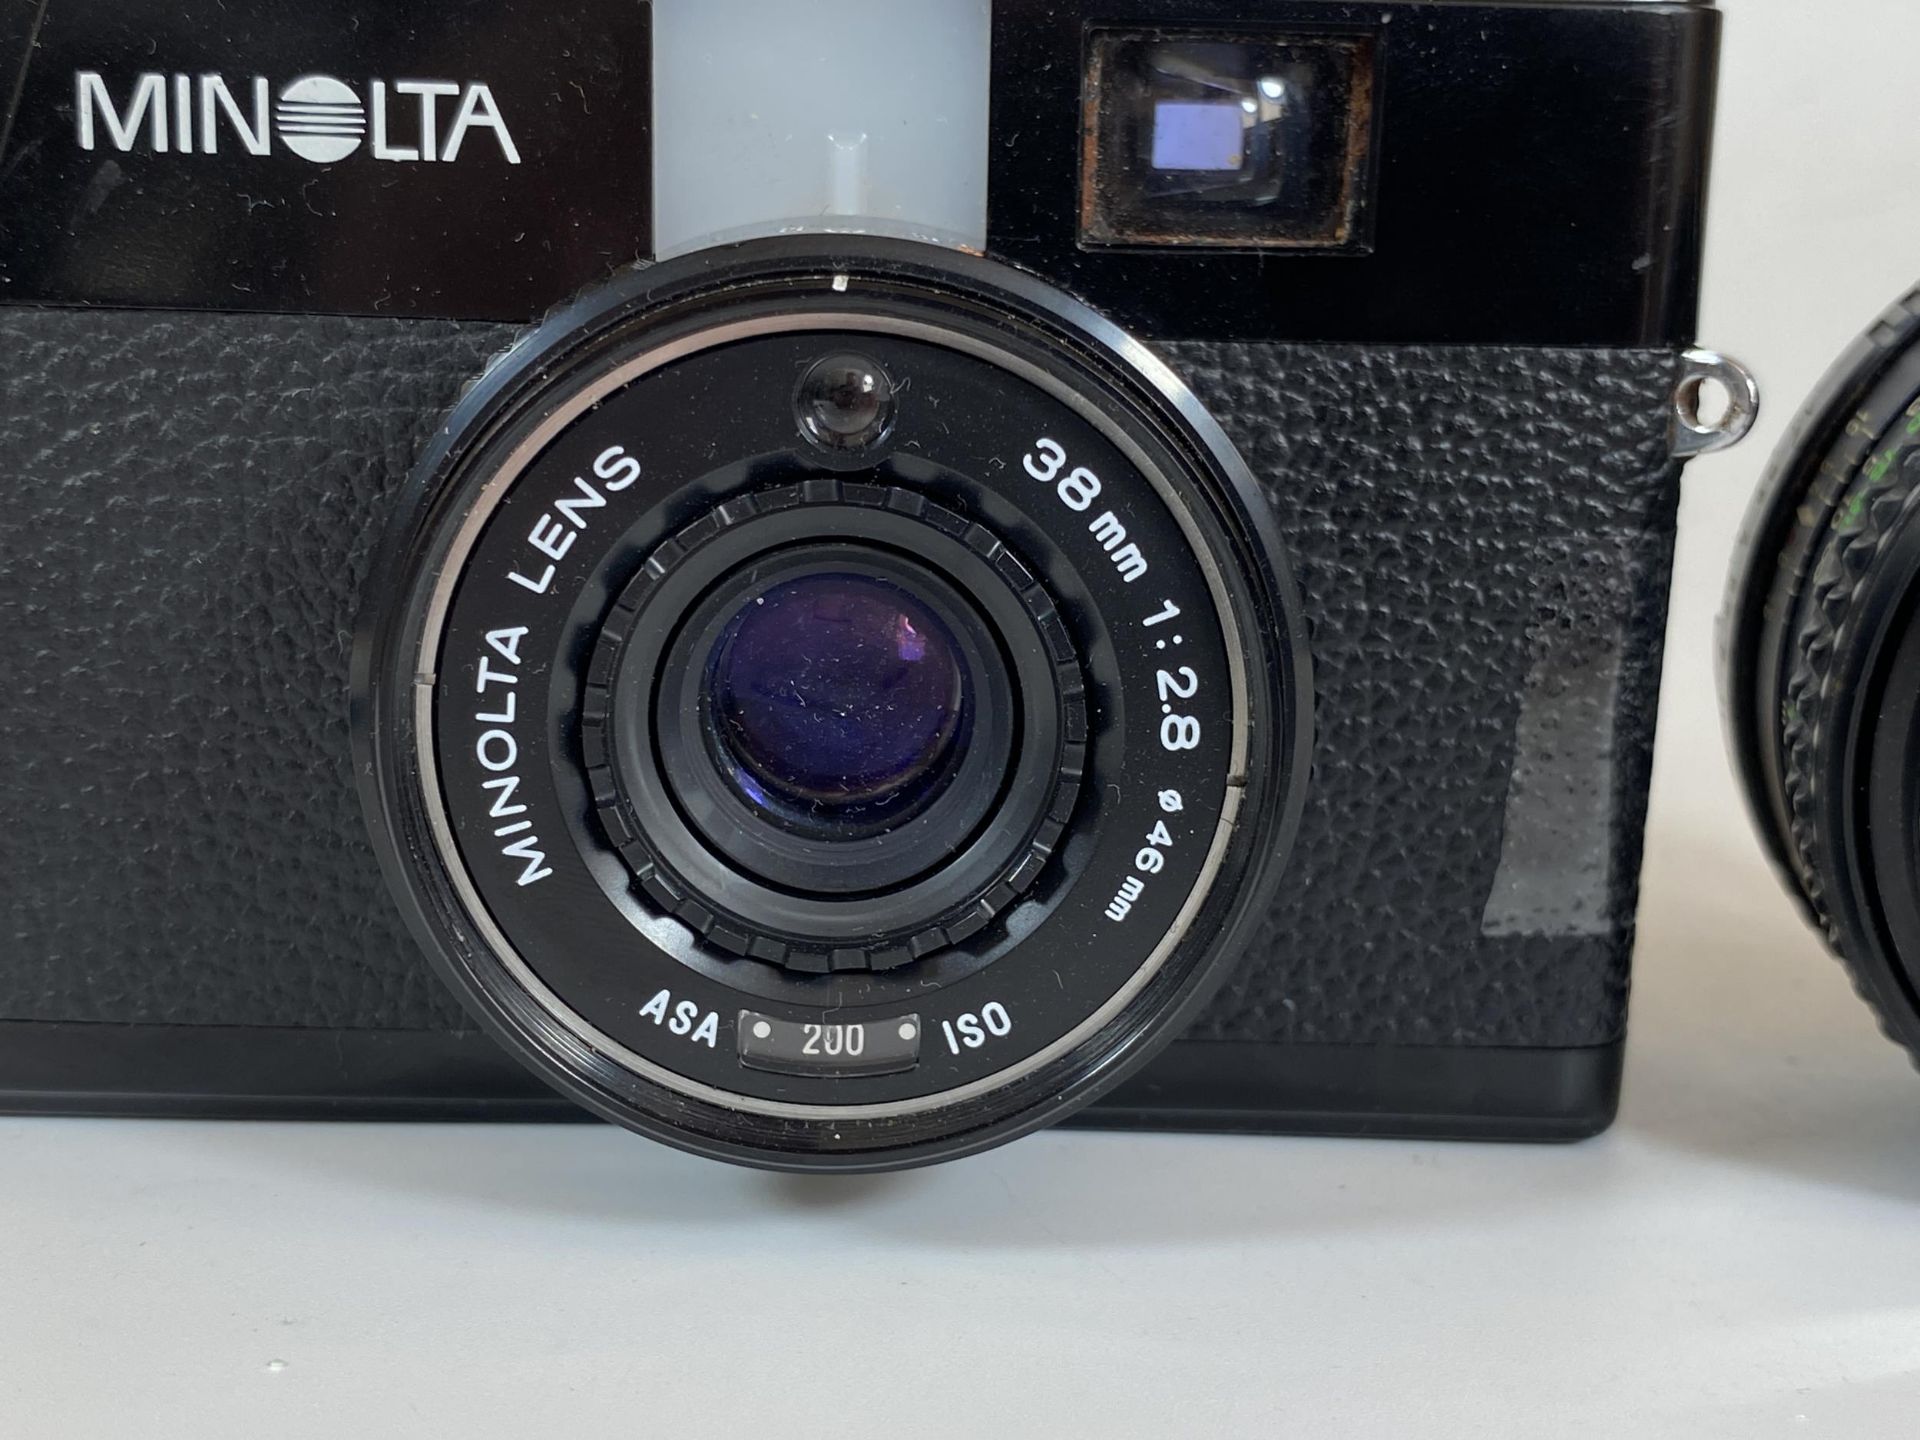 A MINOLTA CAMERA WITH 38MM 1:2.8 46MM LENS AND FURTHER MINOLTA MD ROKKOR 50MM 1:1.7 LENS - Image 3 of 4